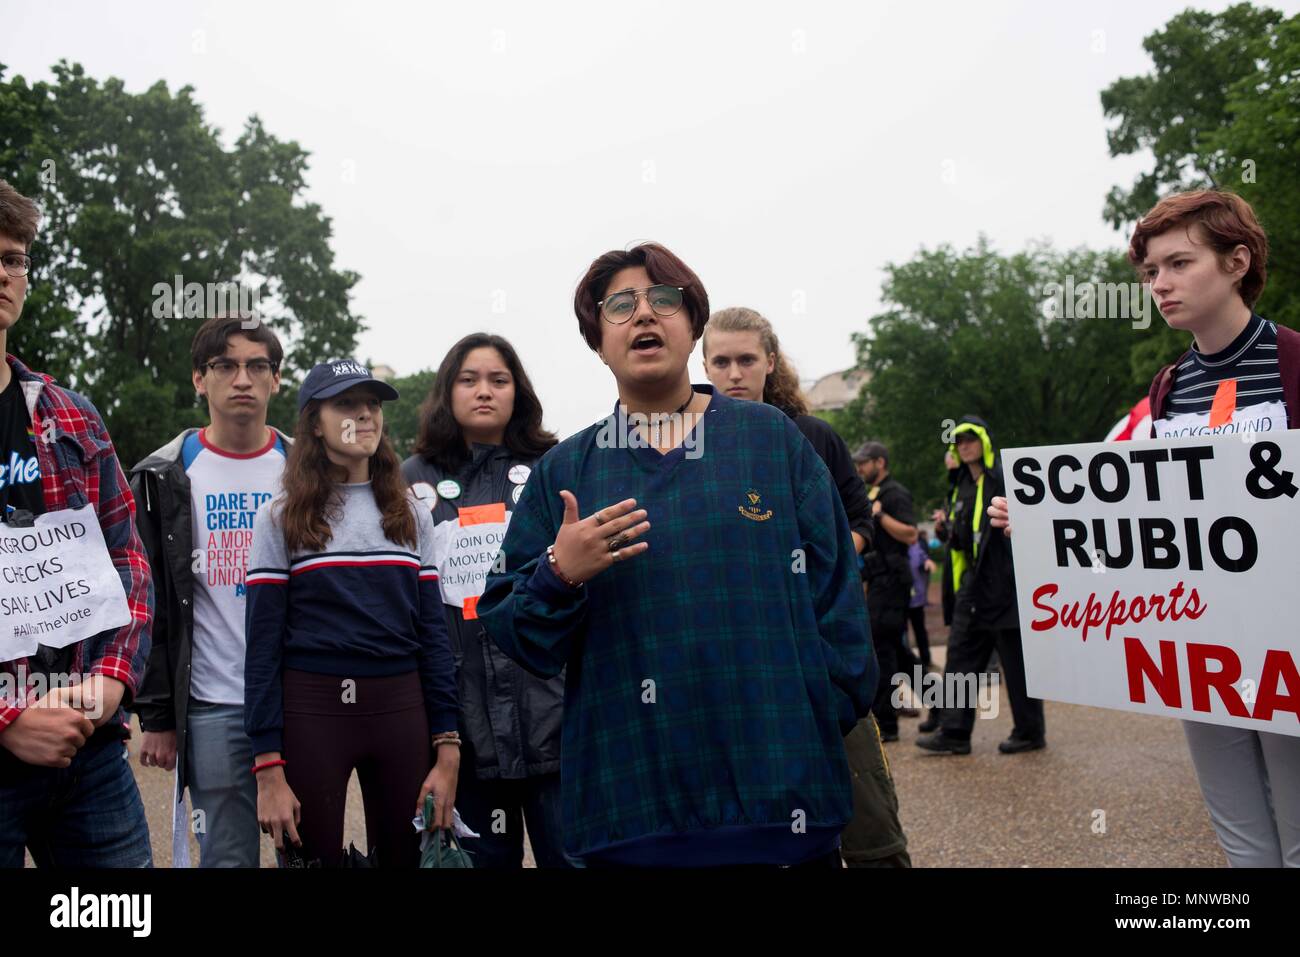 Washington, District of Columbia, USA. 19th May, 2018. Cheema, a foreign-exchange student from Pakistan, speaks at an anti-gun protest in front of the White House. She came to the U.S. in the same group of students as Sabika Sheikh, one of the victims in the Santa Fe High School shooting in Texas. Credit: Erin Scott/ZUMA Wire/Alamy Live News Stock Photo